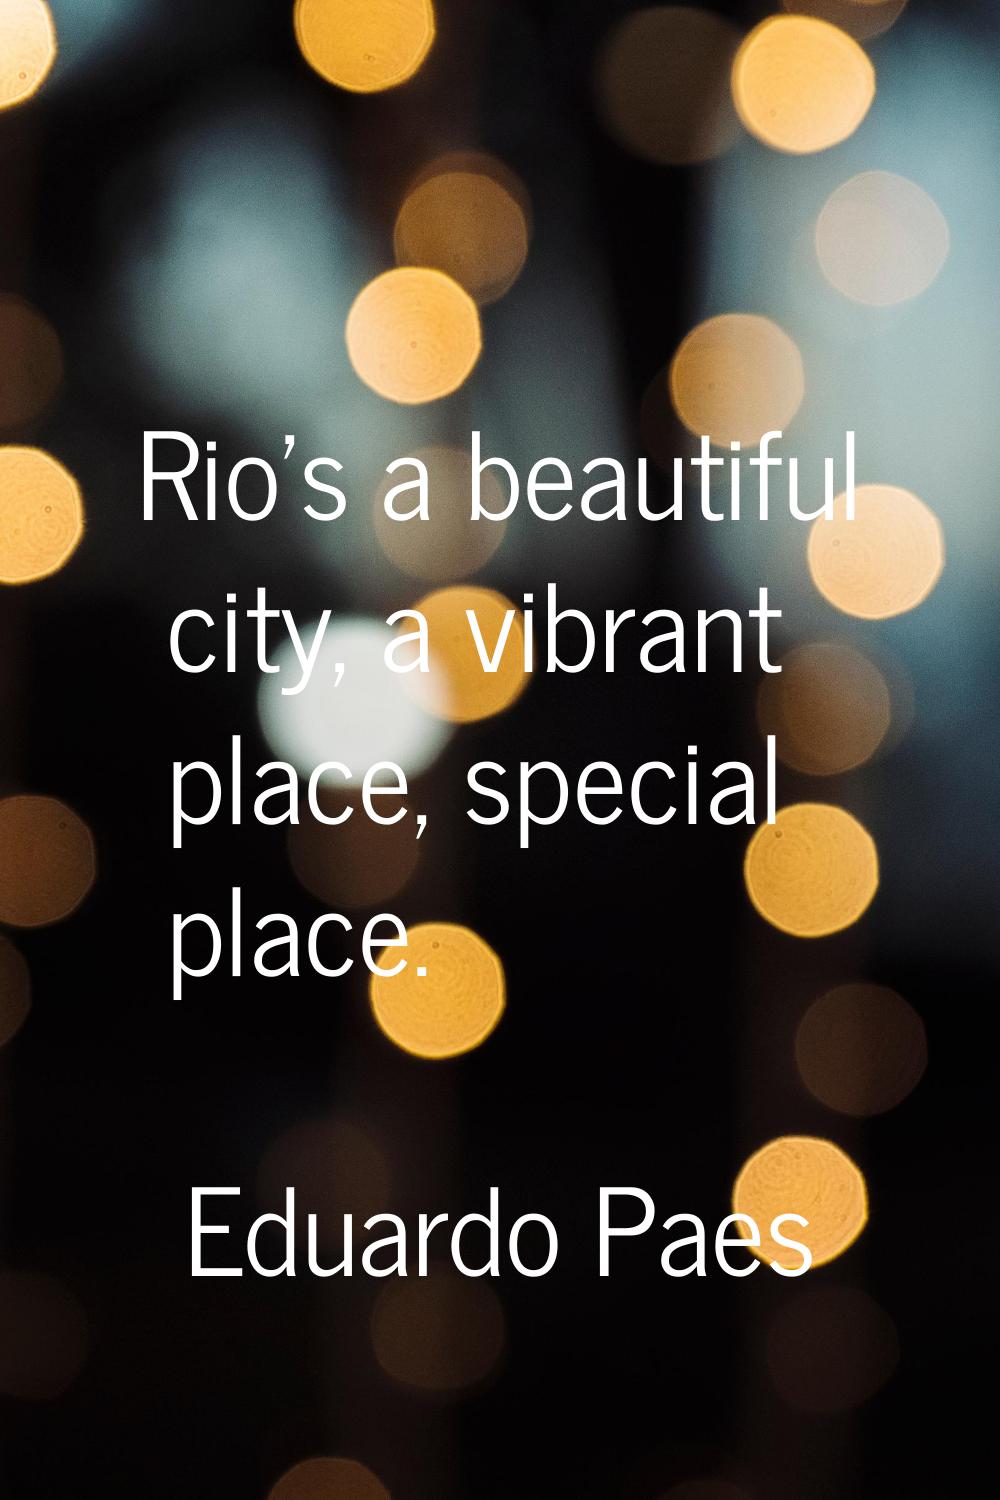 Rio's a beautiful city, a vibrant place, special place.